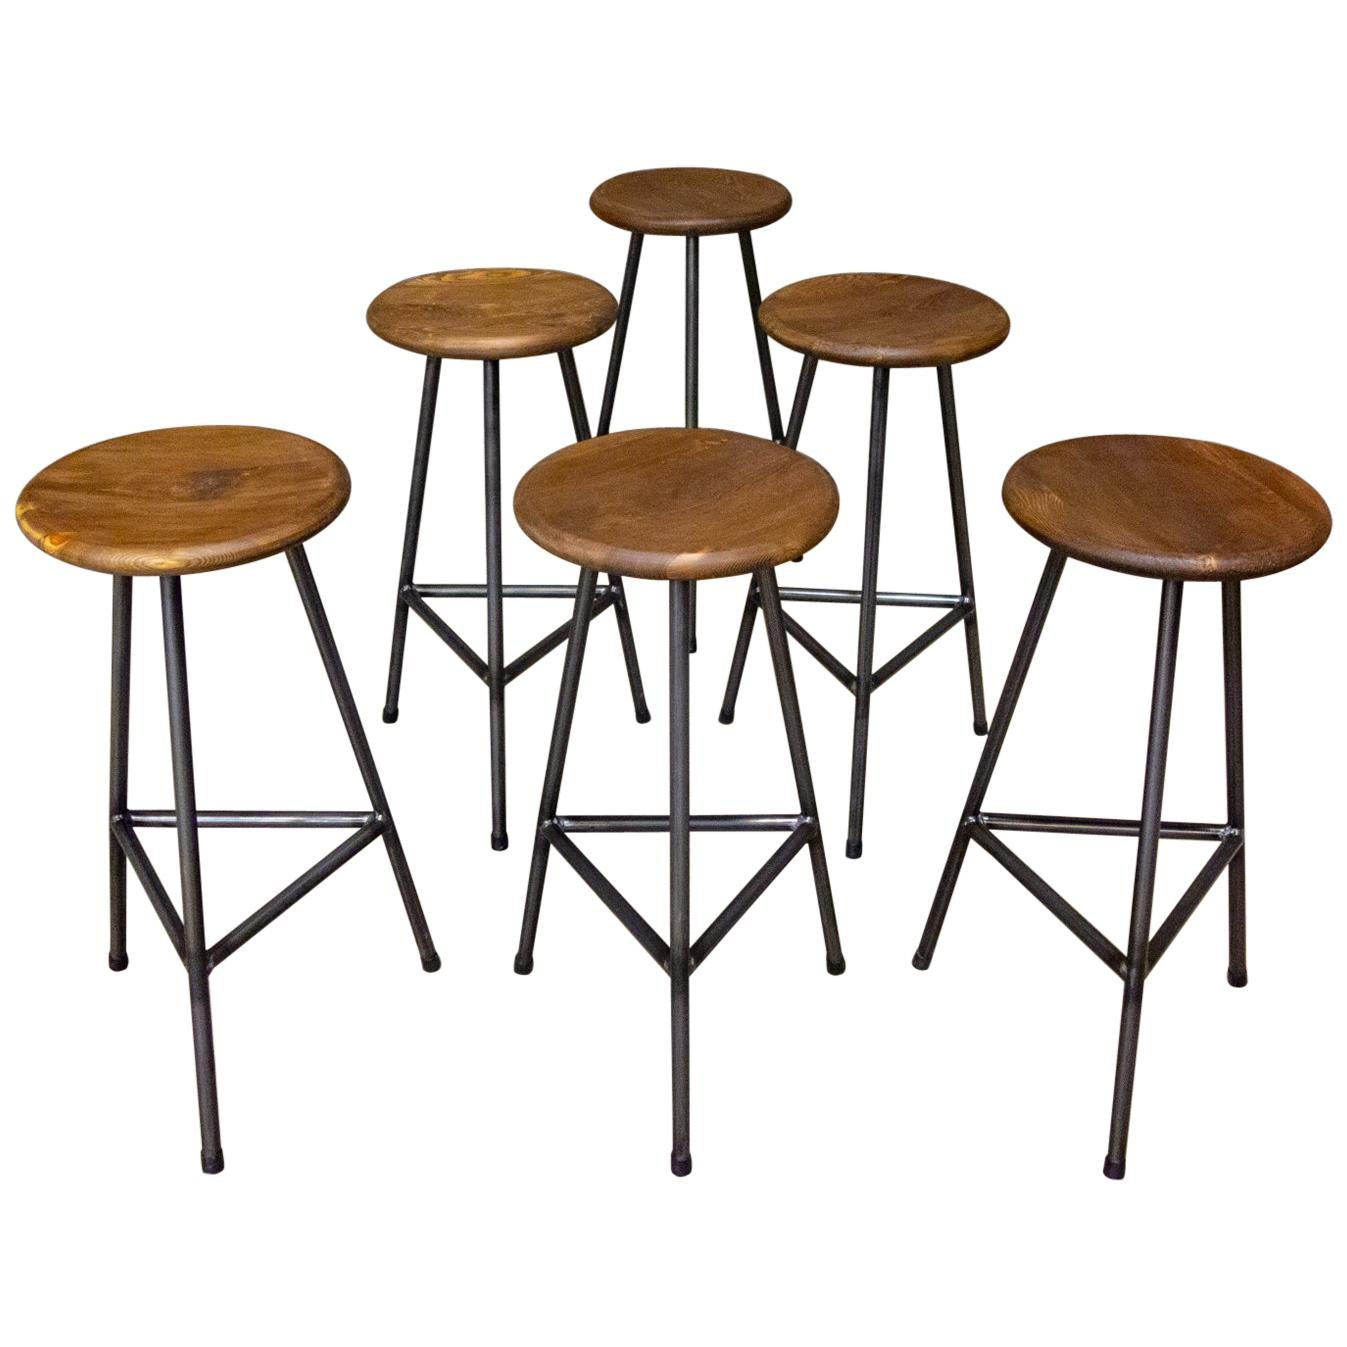 Handcrafted Industrial Bar Stools For Sale